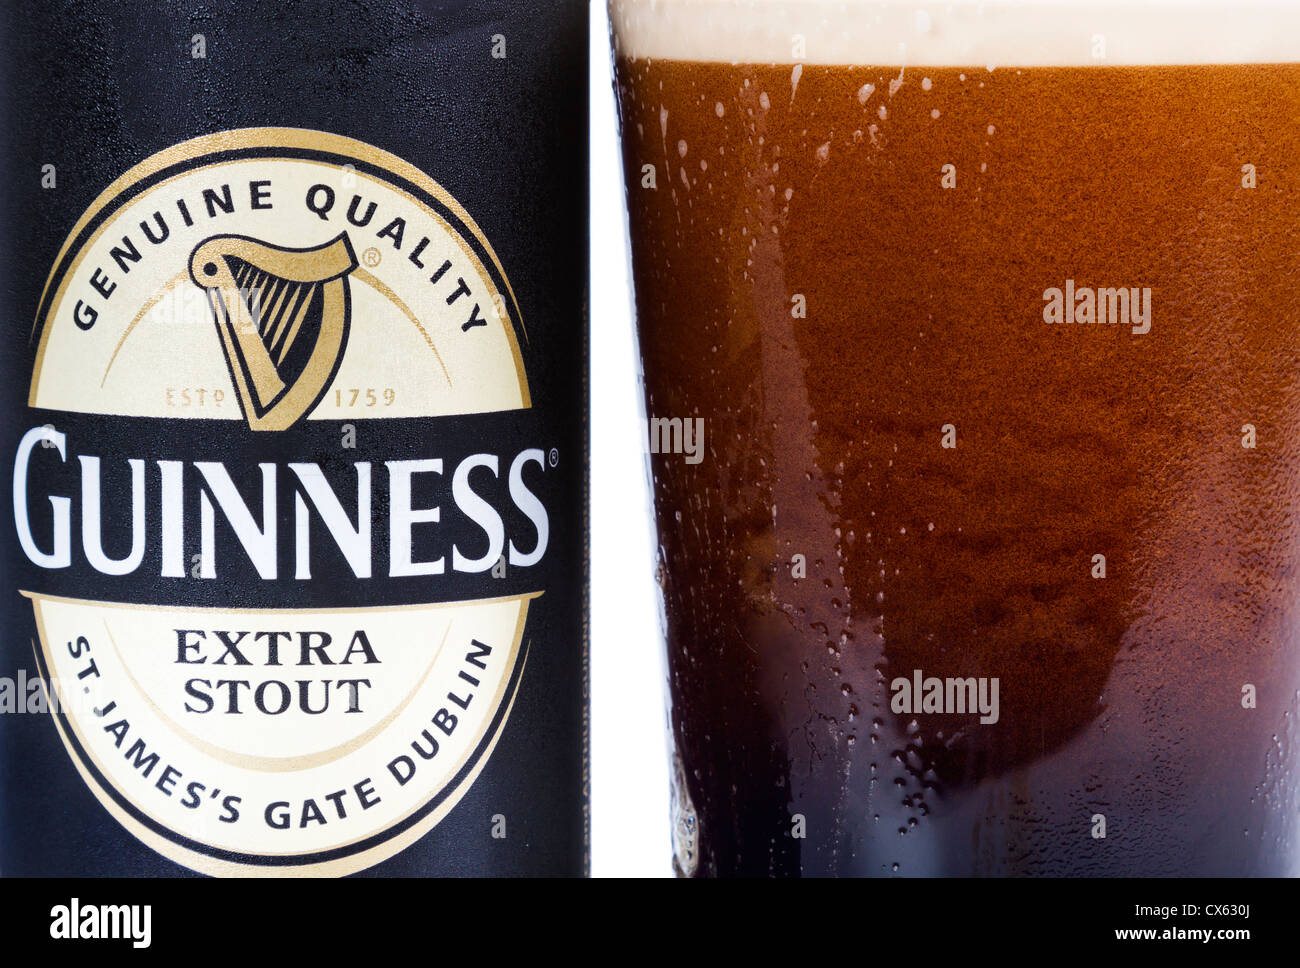 Dublin, Ireland - September 12, 2012. This is a studio product shot of a can of Guinness stout next to a glass of freshly poured Stock Photo